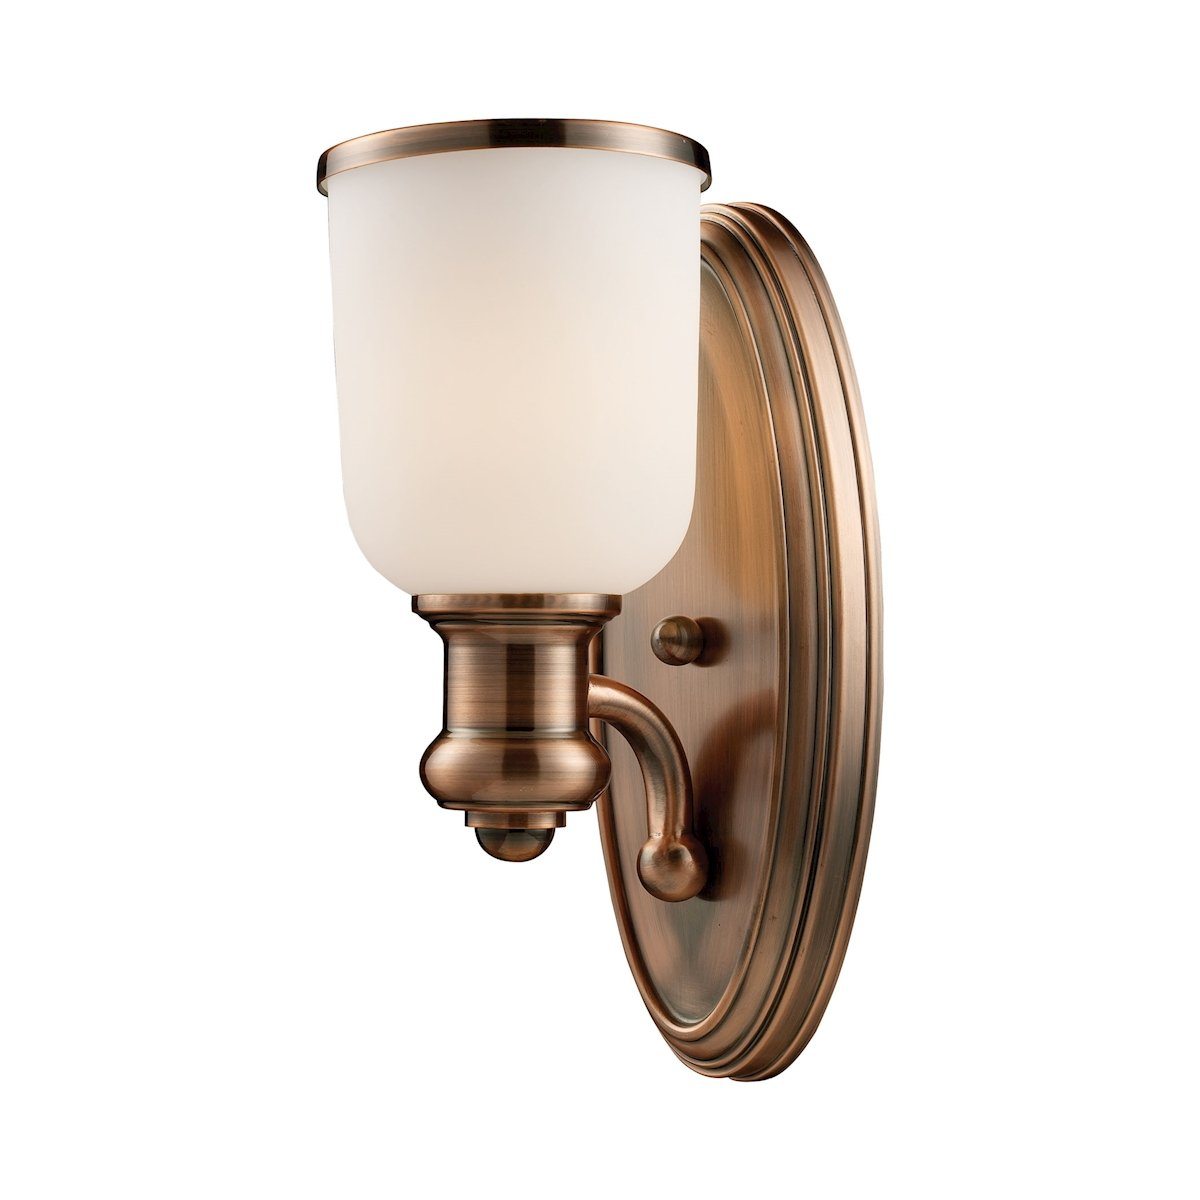 Brooksdale 1 Light Wall Sconce In Antique Copper And White Glass Wall Sconce Elk Lighting 